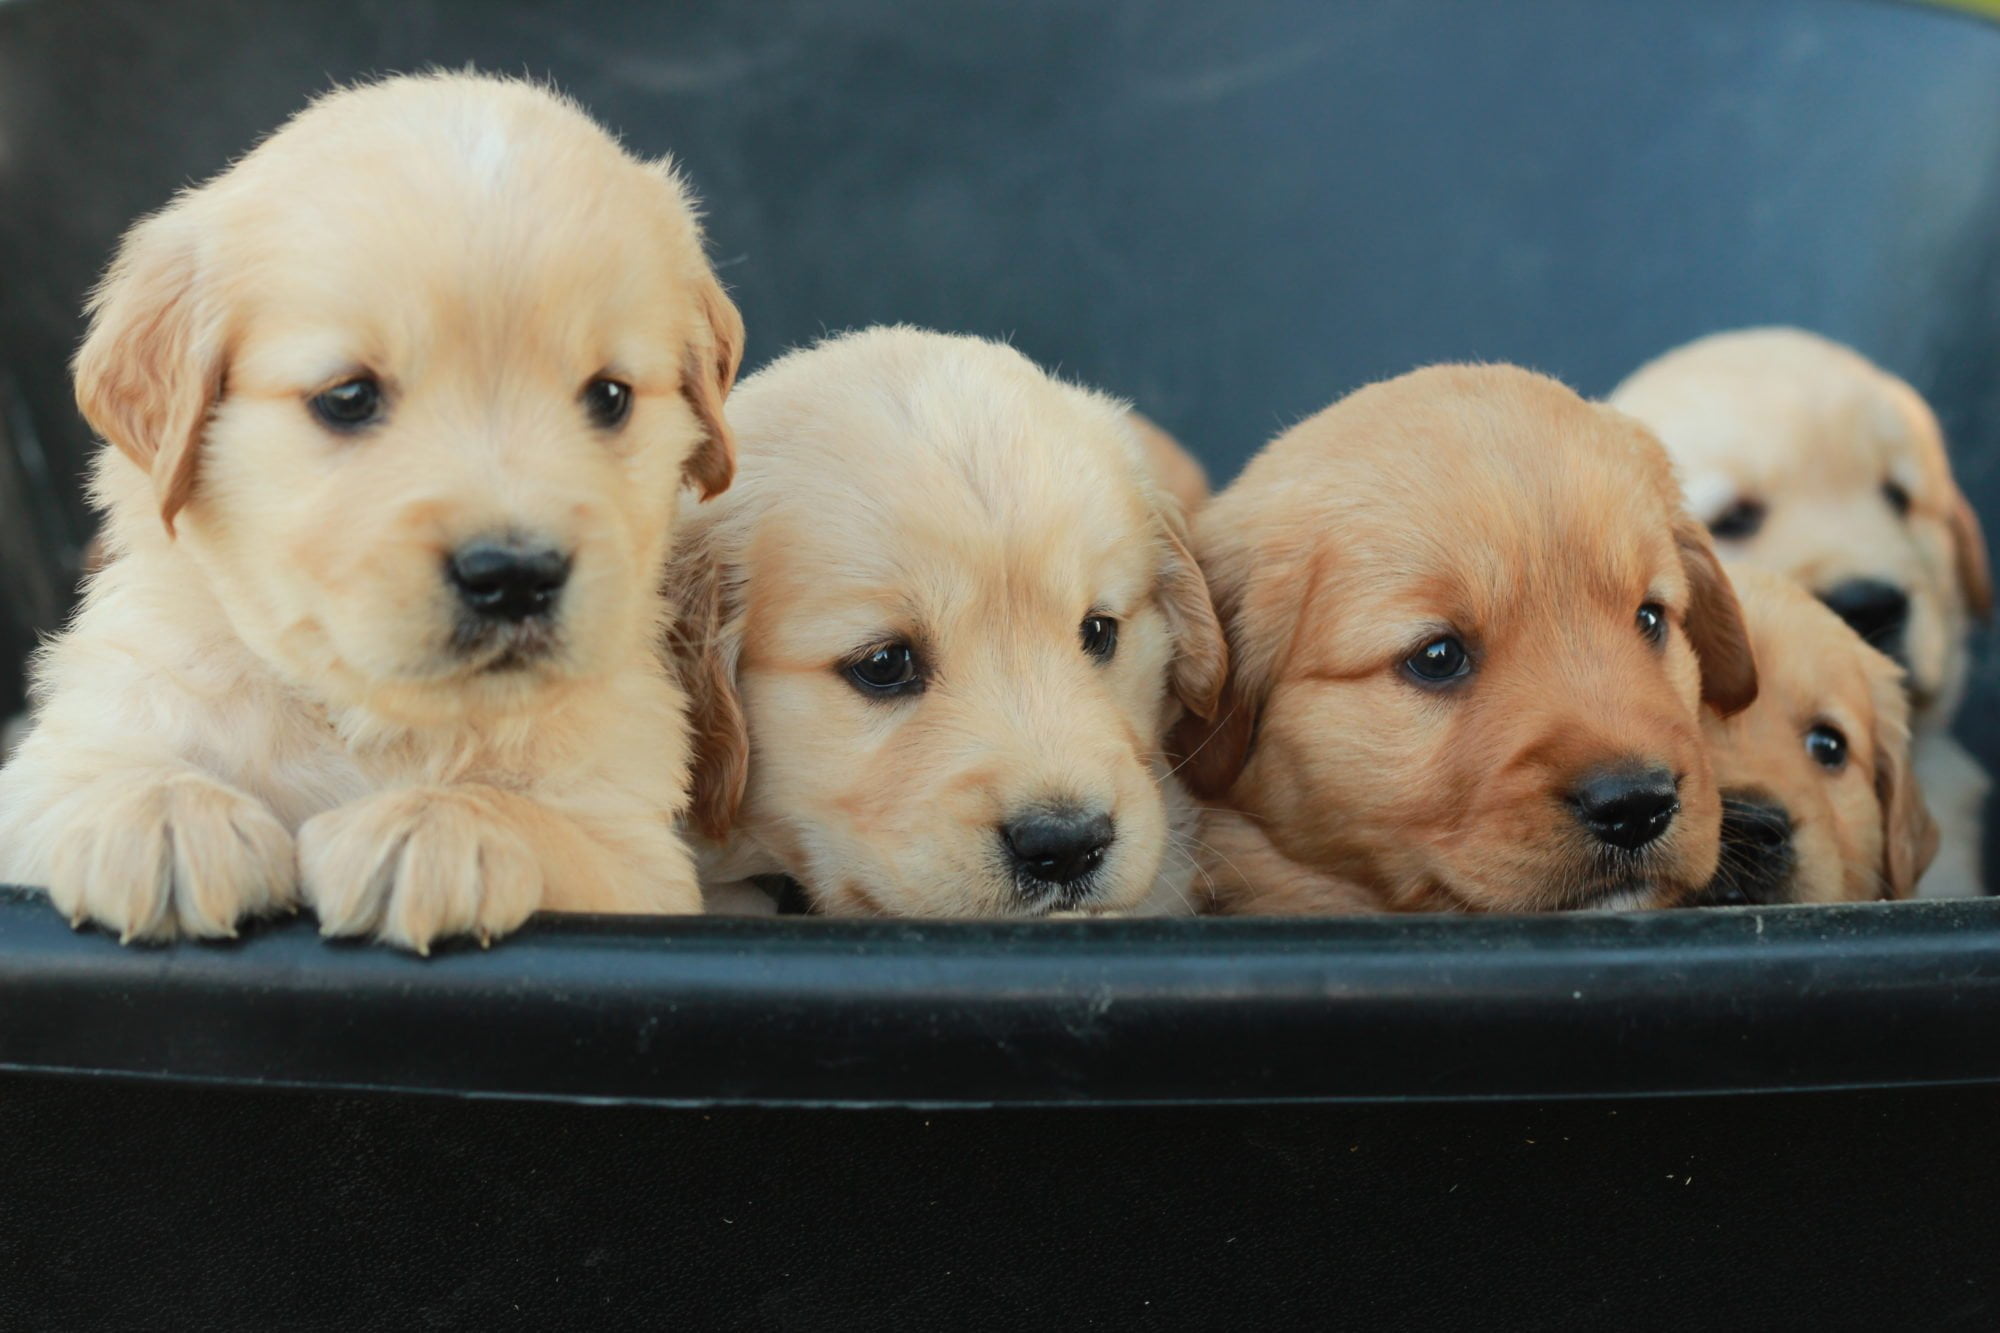 Reserve your golden retriever puppy from Windy Knoll